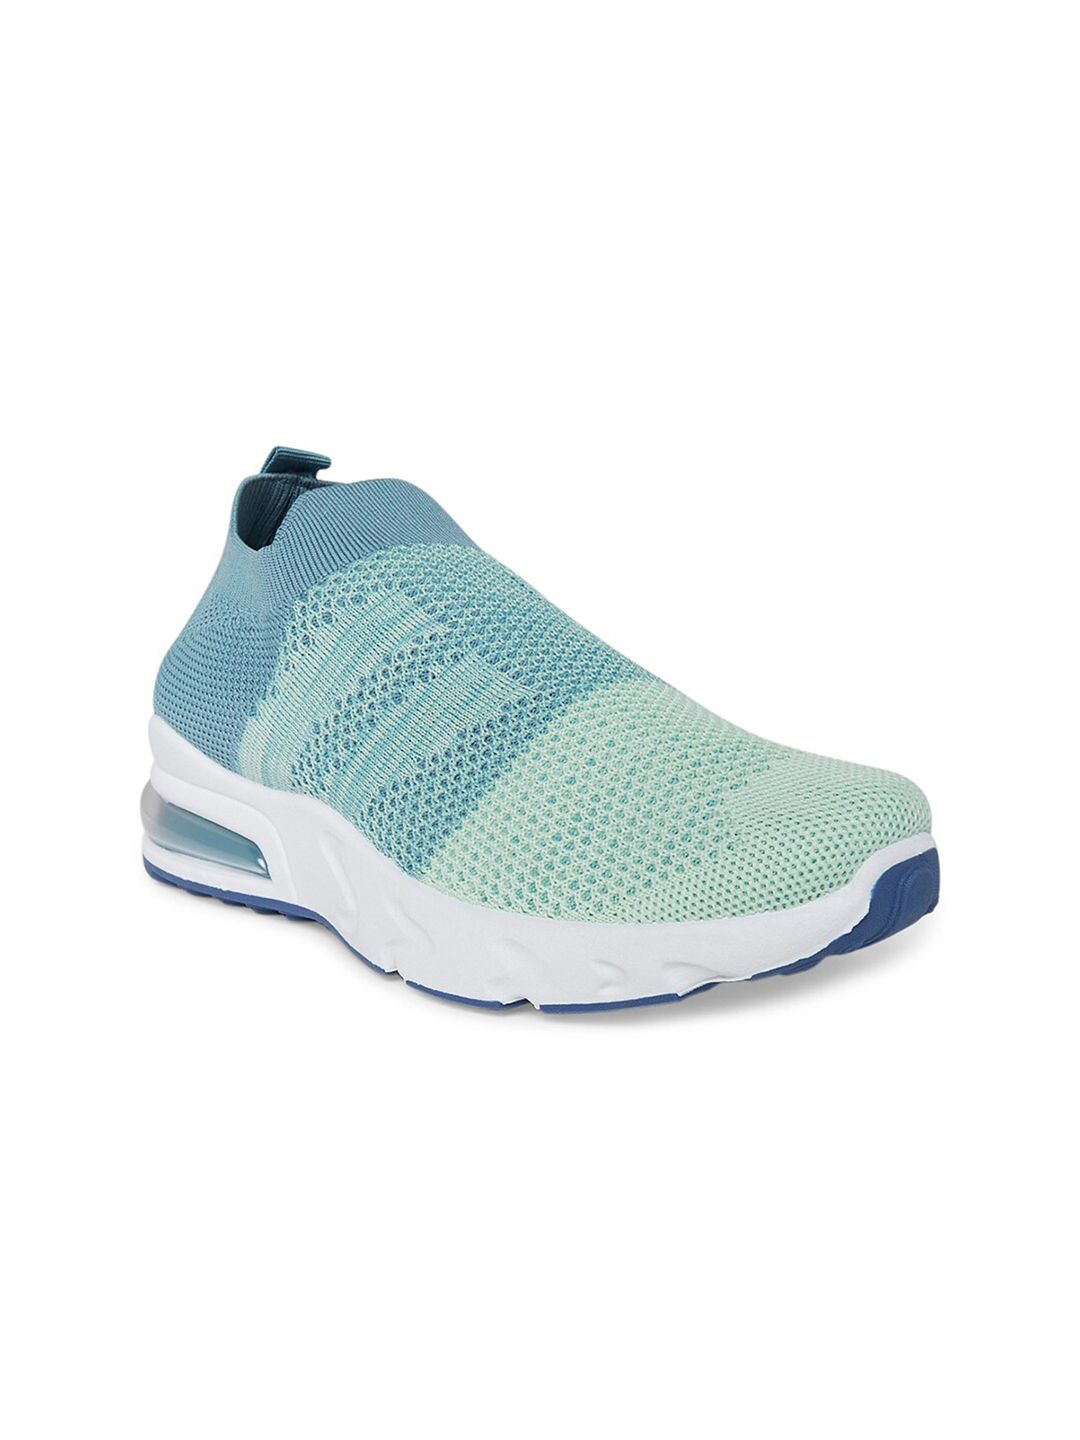 Forever Glam by Pantaloons Women Green & Blue Textile Running Non-Marking Shoes Price in India